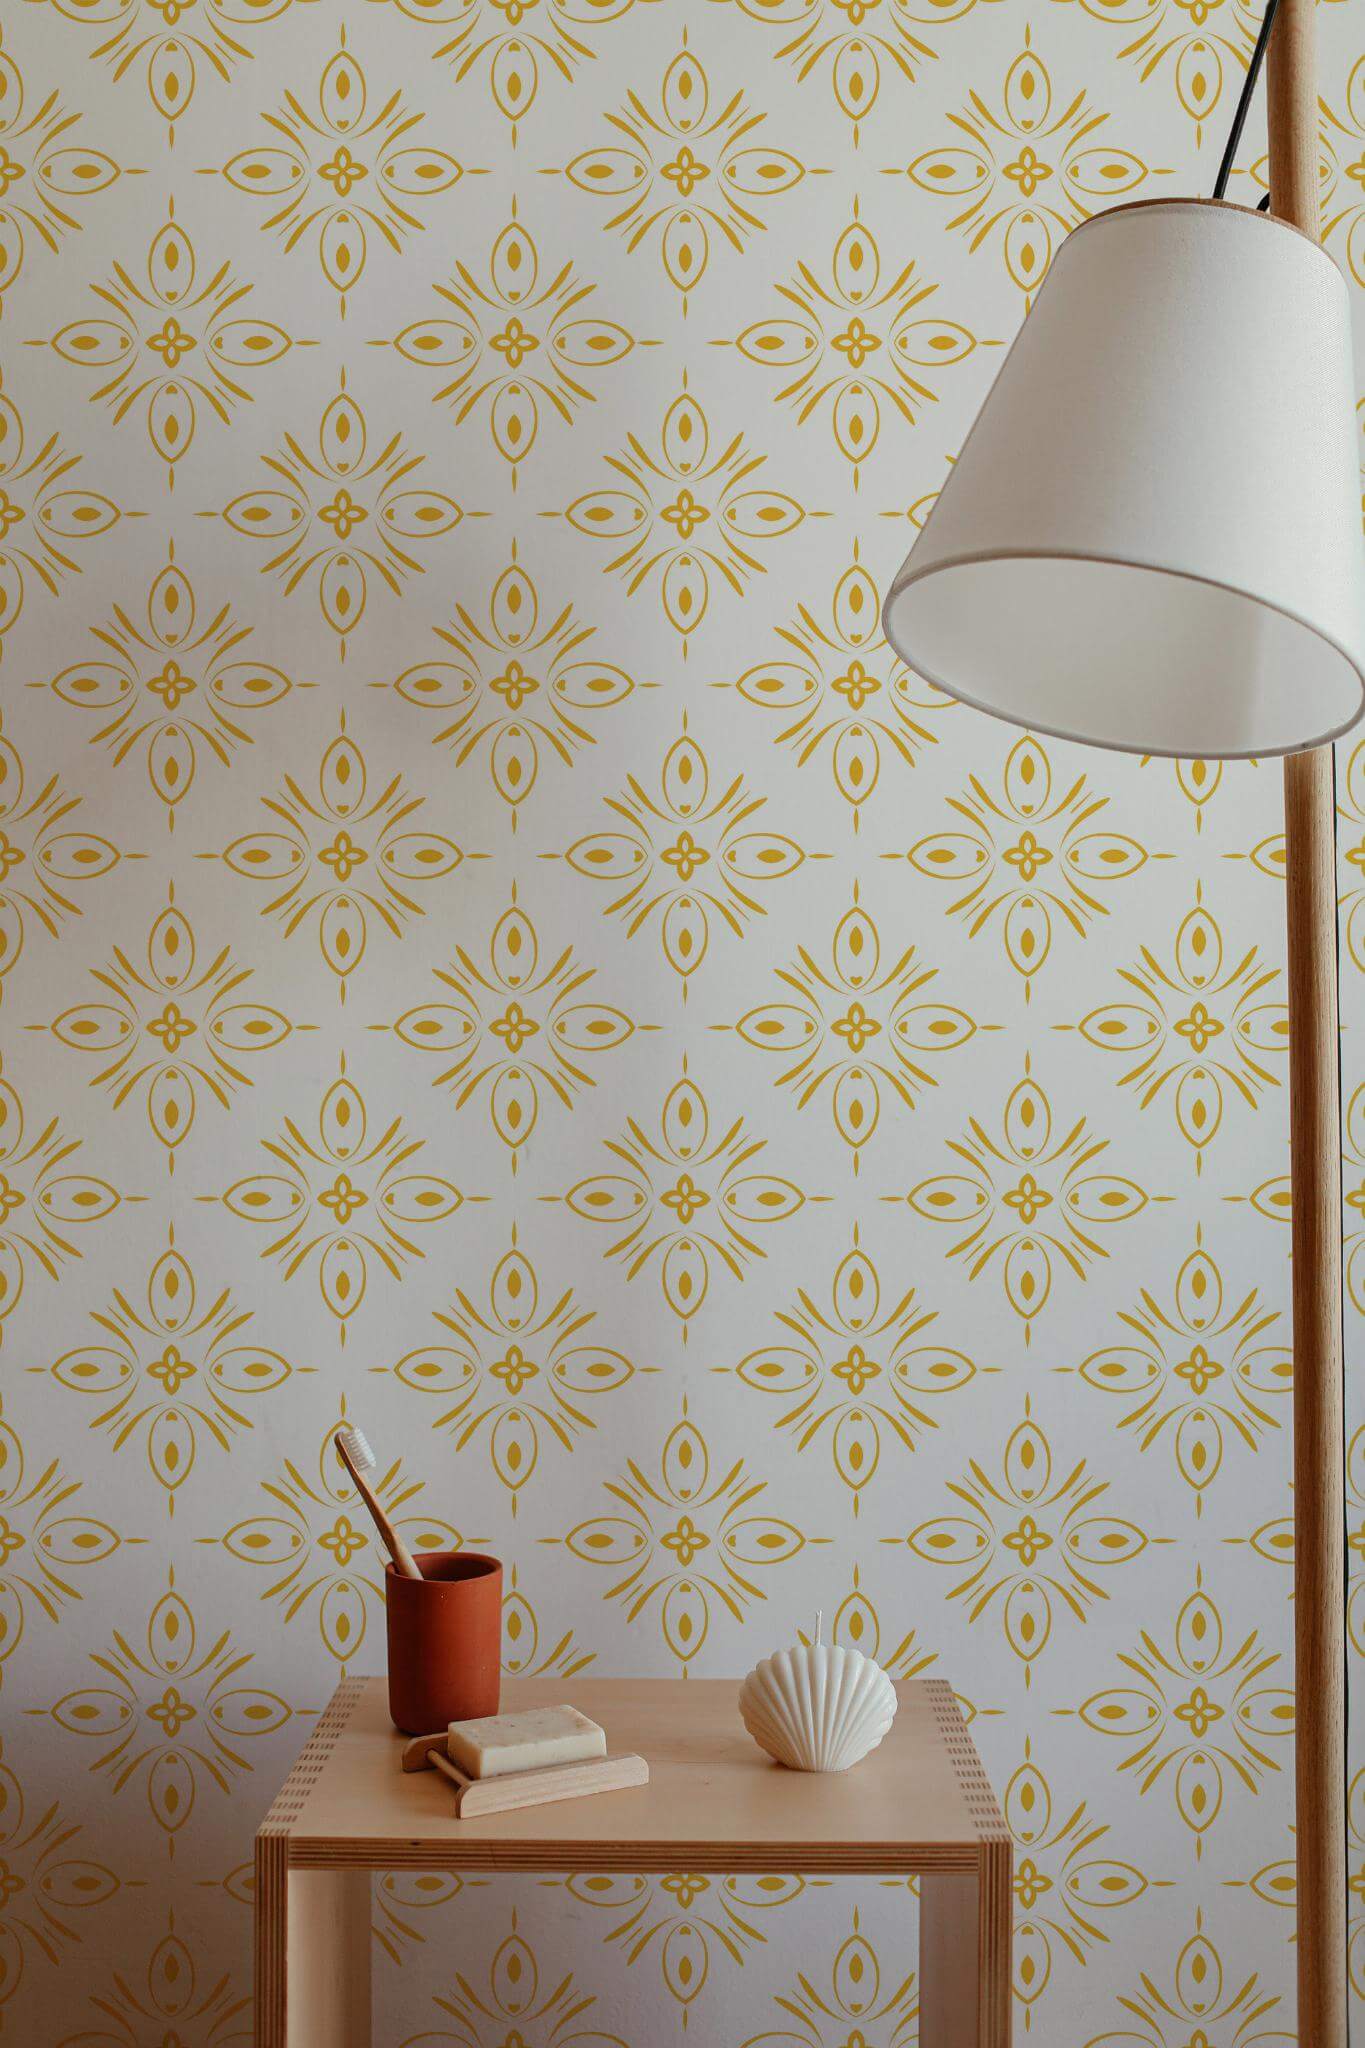 Olive Floral Wallpaper, Adhesive Wallpaper, Wallpaper Peel And Stick, Removable Wallpaper, Wall Paper Peel And Stick